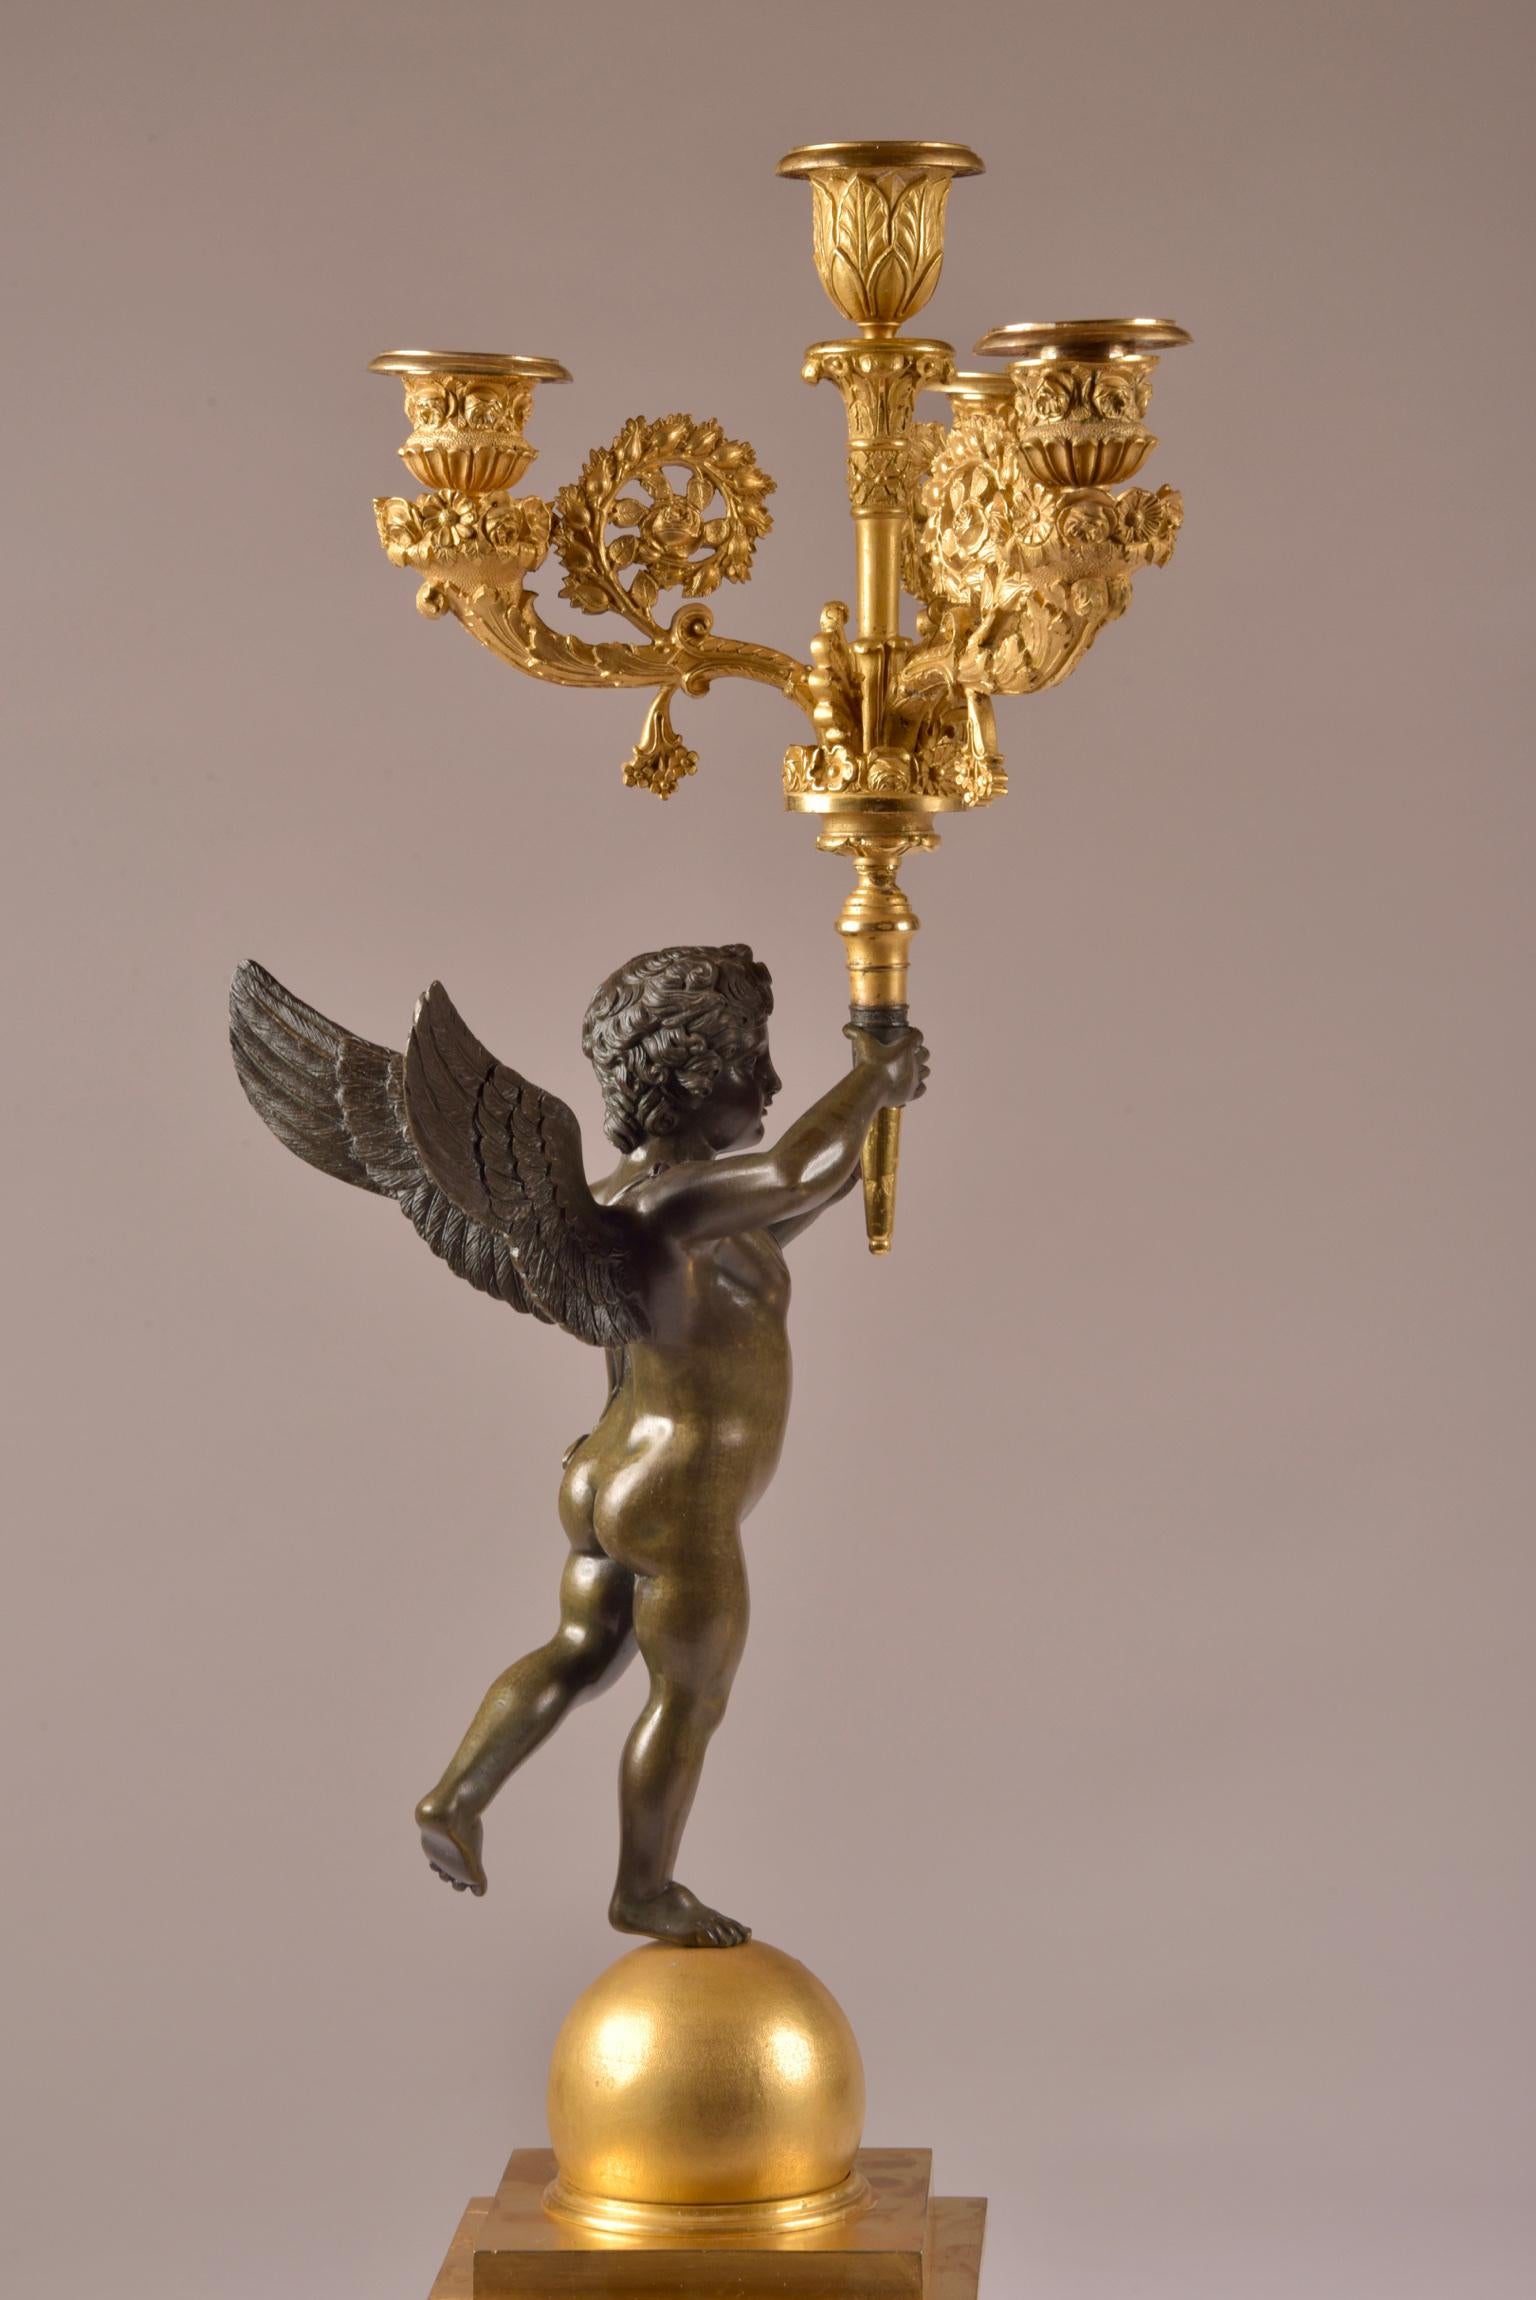 Pair of French Empire Candelabras with Putti, Superb Ormolu Candleholders, 1810  For Sale 1